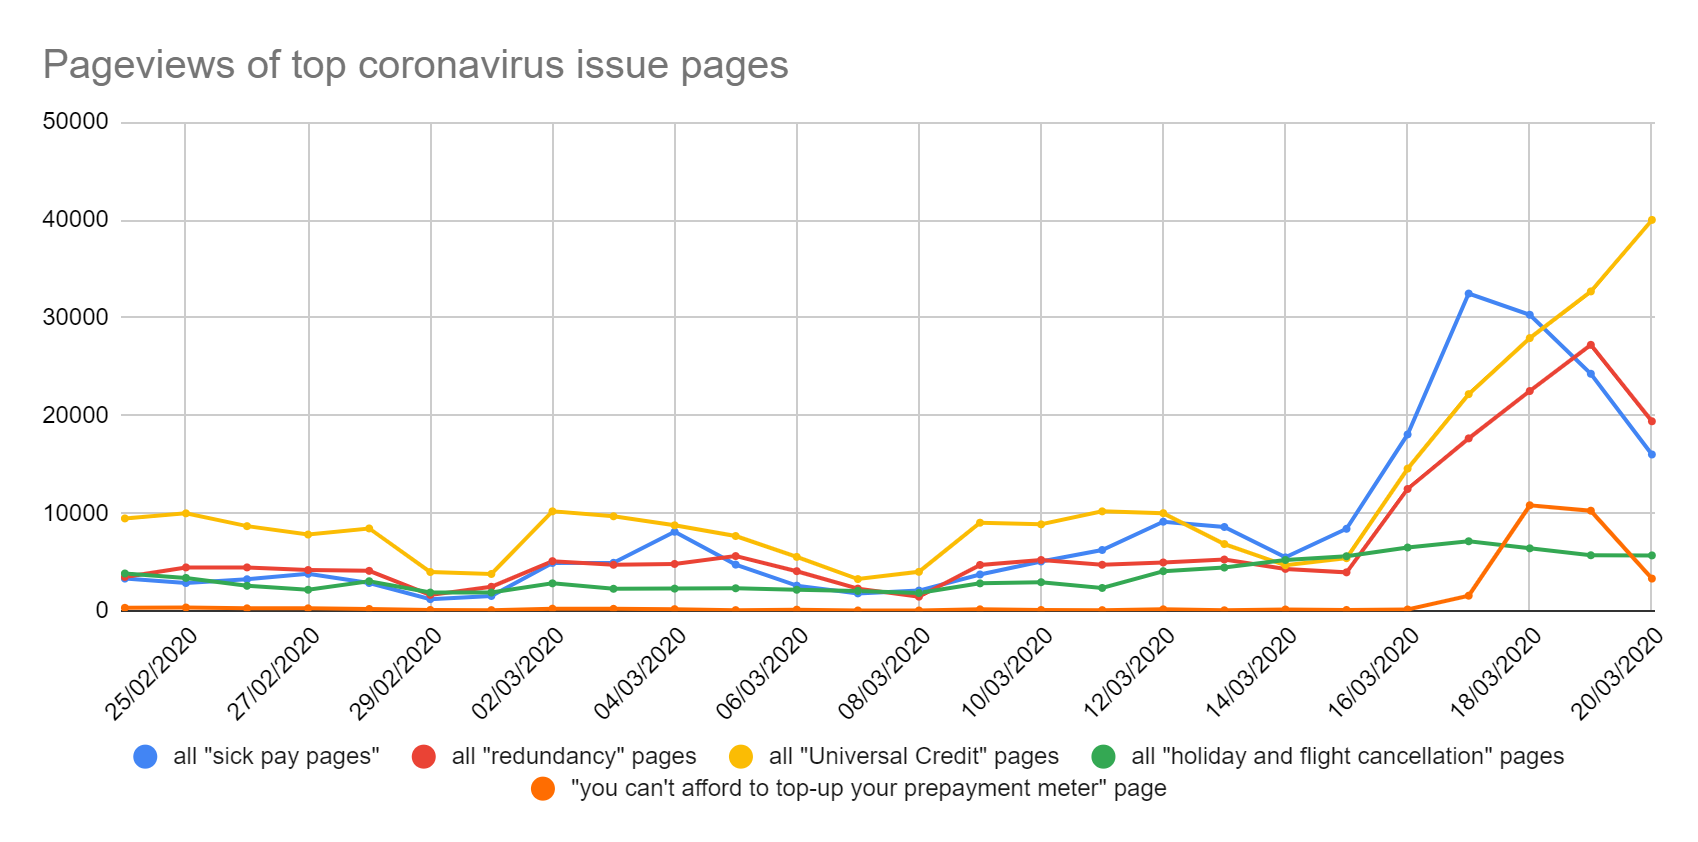 Pageviews of top coronavirus issues pages